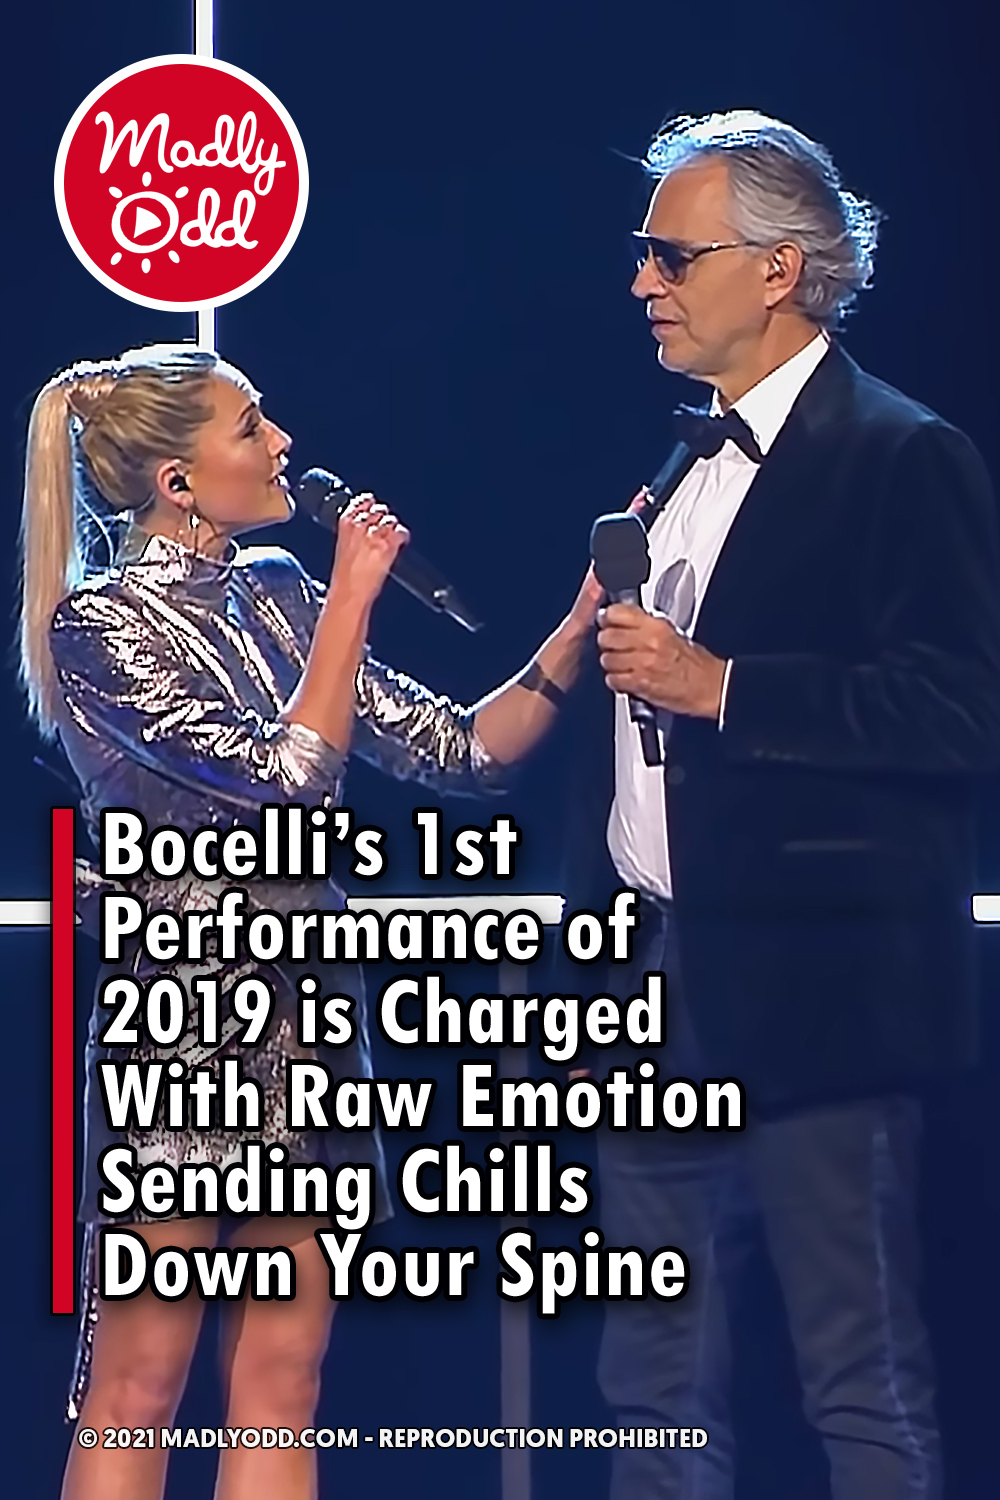 Bocelli\'s 1st Performance of 2019 is Charged With Raw Emotion Sending Chills Down Your Spine